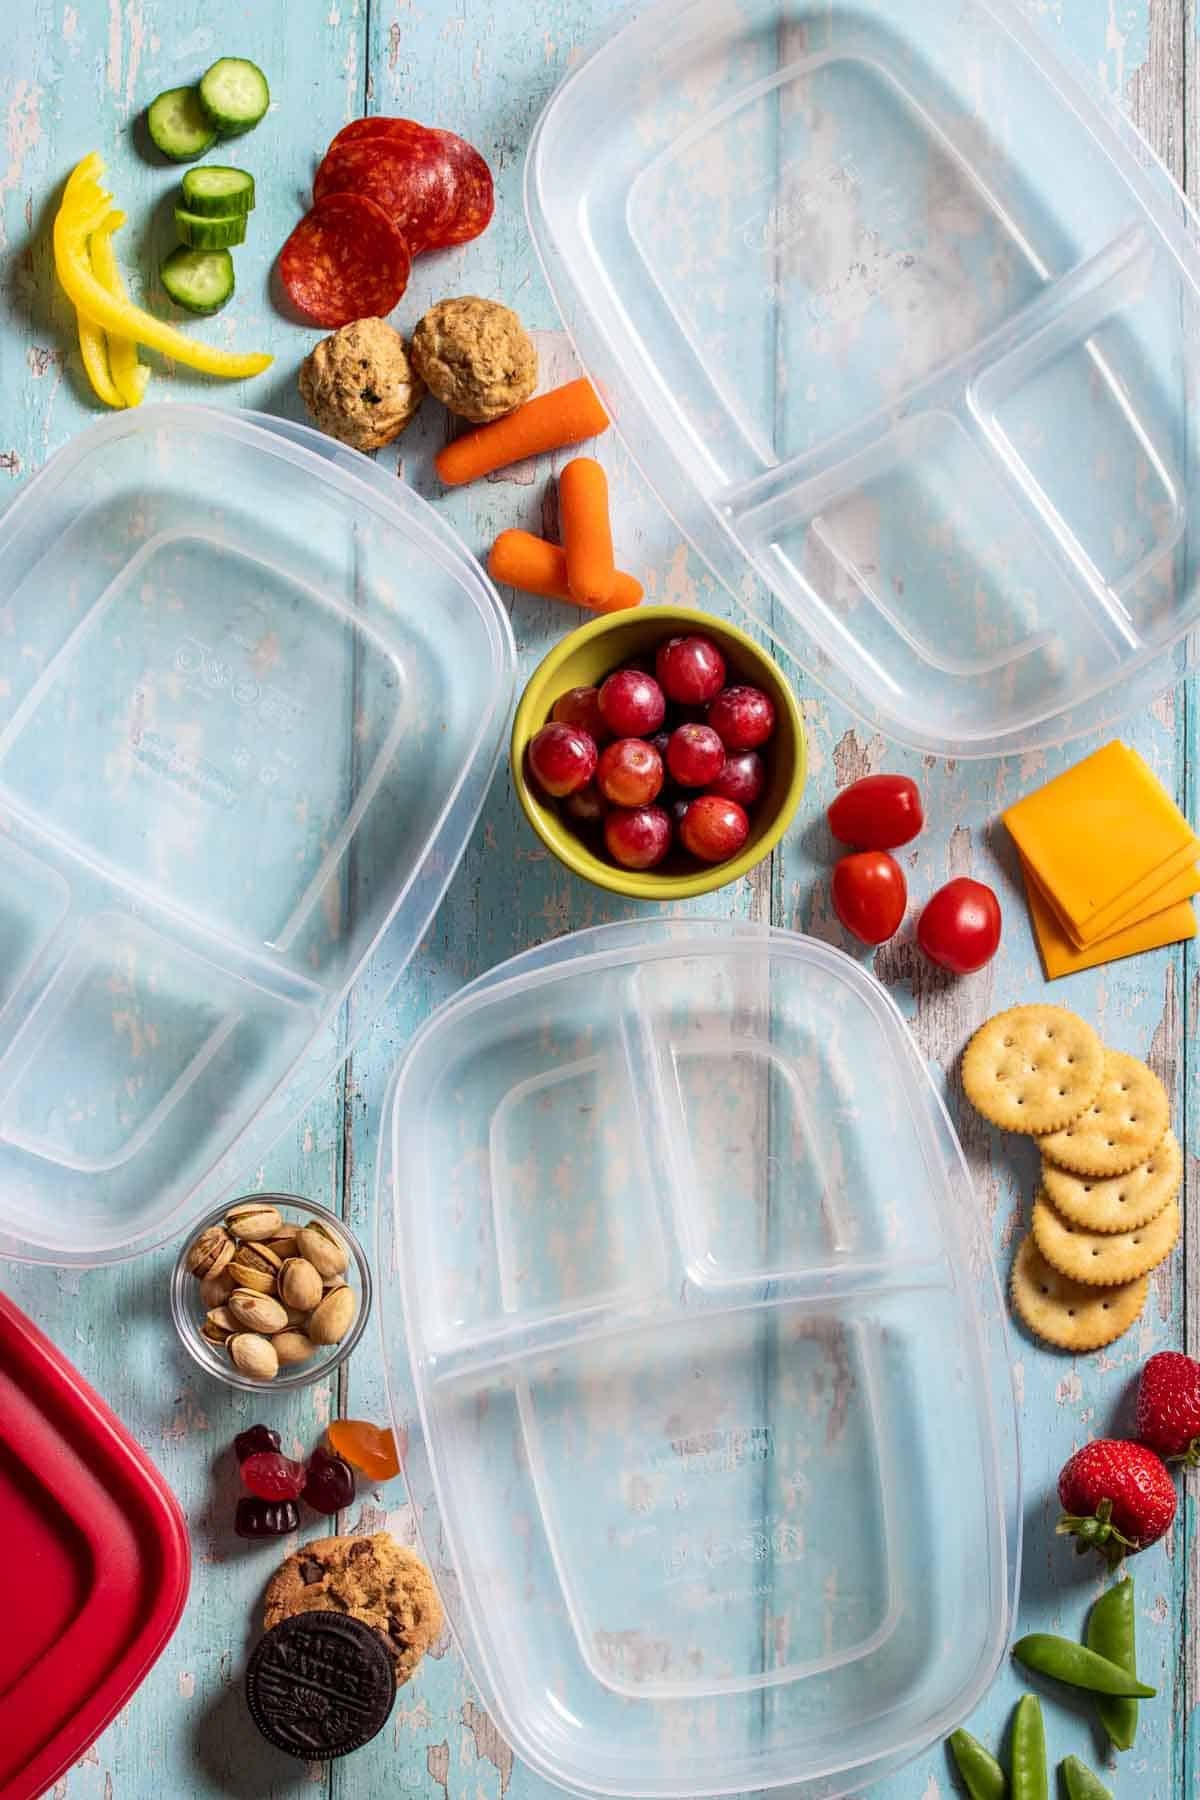 Top view of three empty plastic containers with sections surrounded by fruit, veggies, proteins, cheeses and snacks.